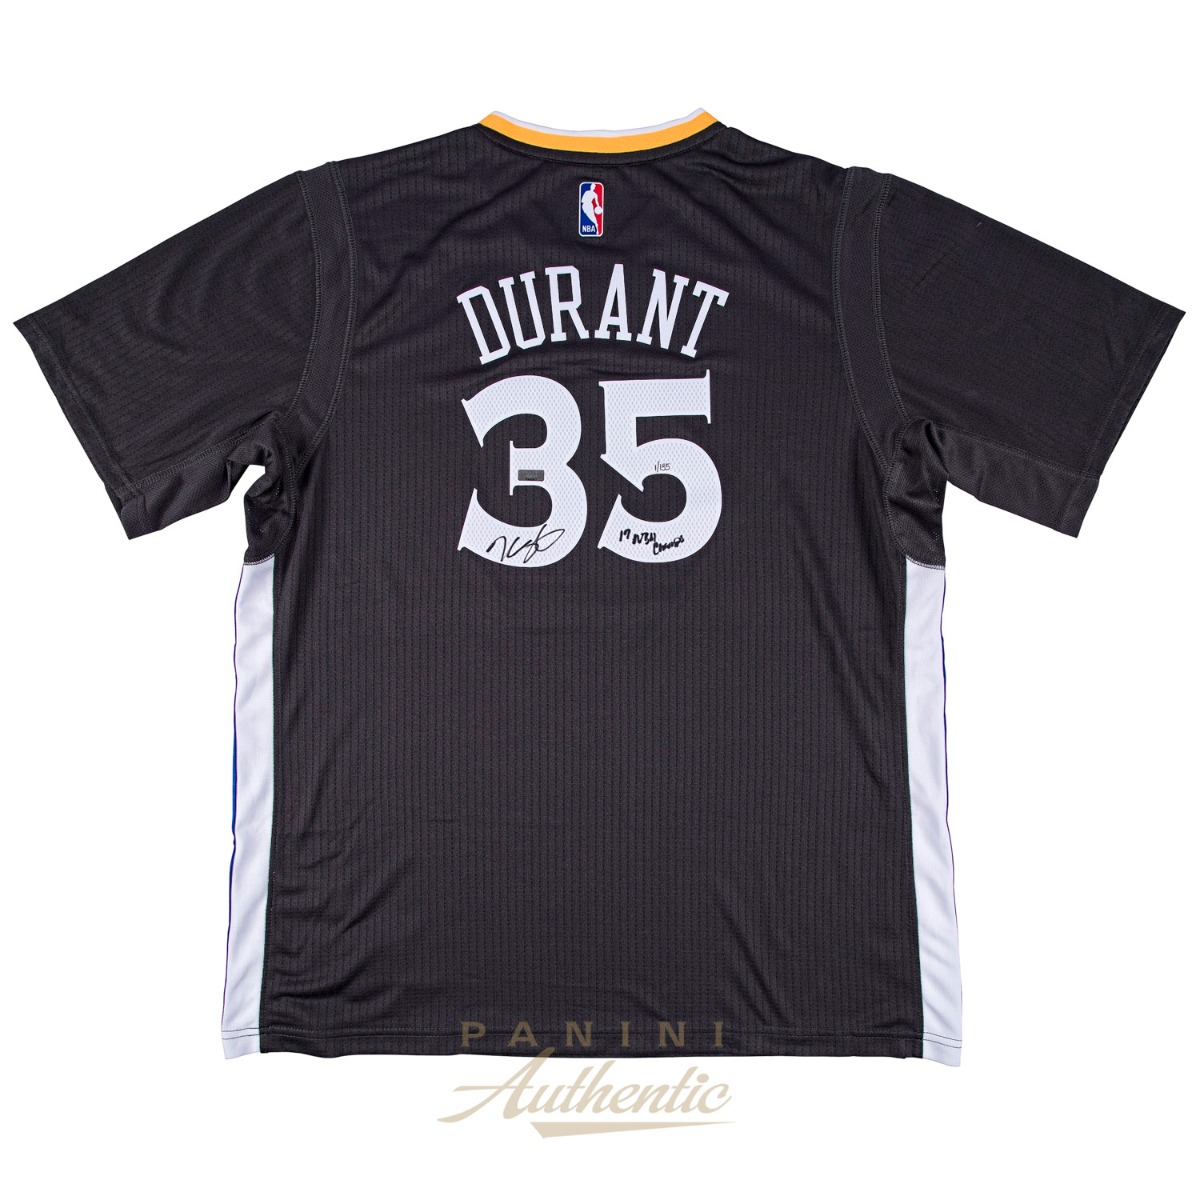 kd jersey number